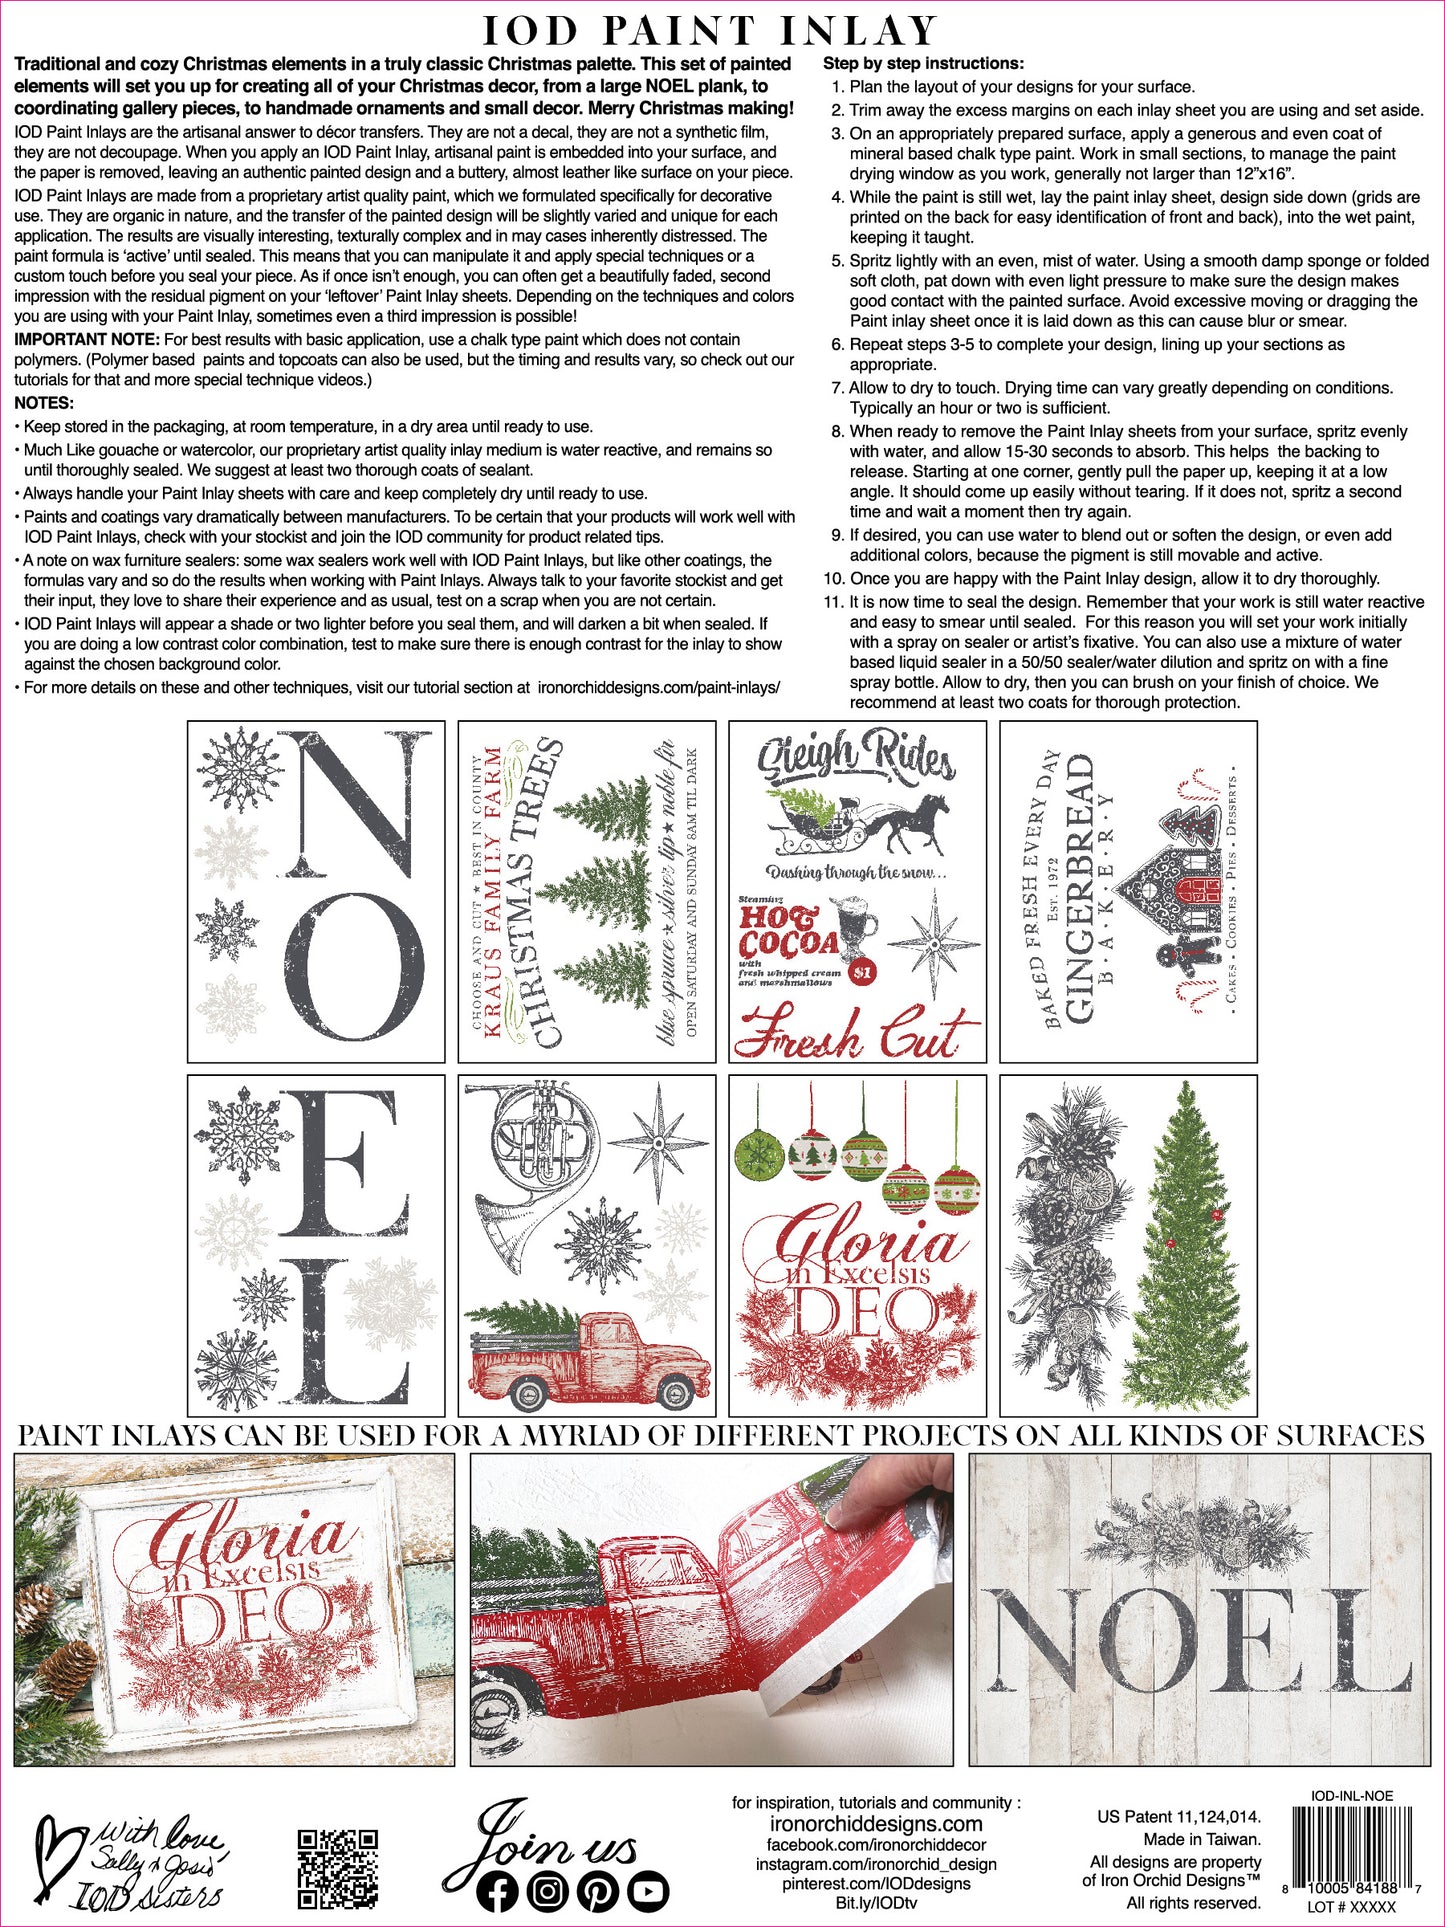 Iron Orchid Designs Noel | IOD Paint Inlay